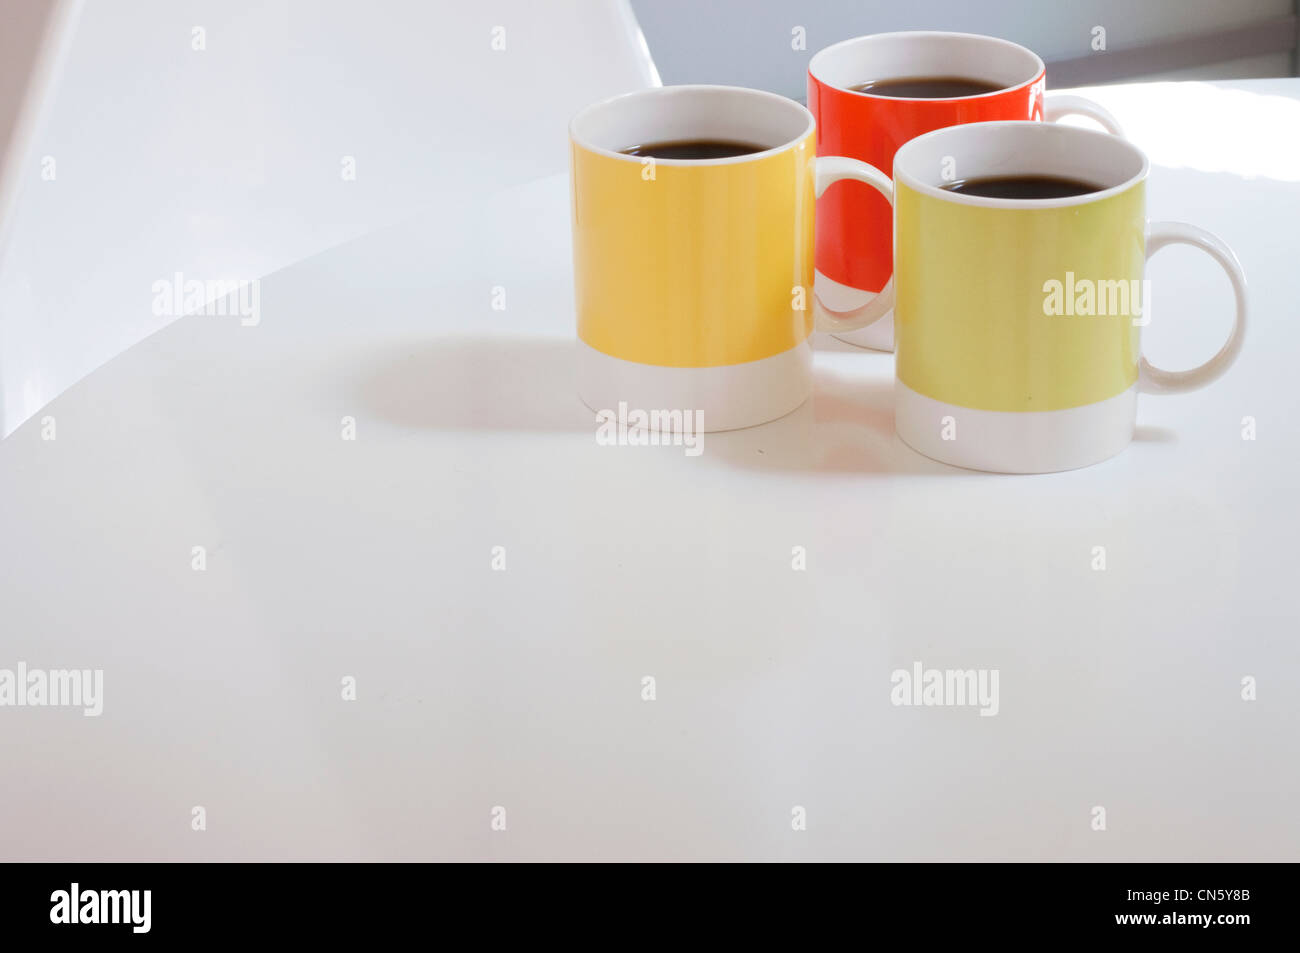 Three mugs of coffee on a white table. Stock Photo